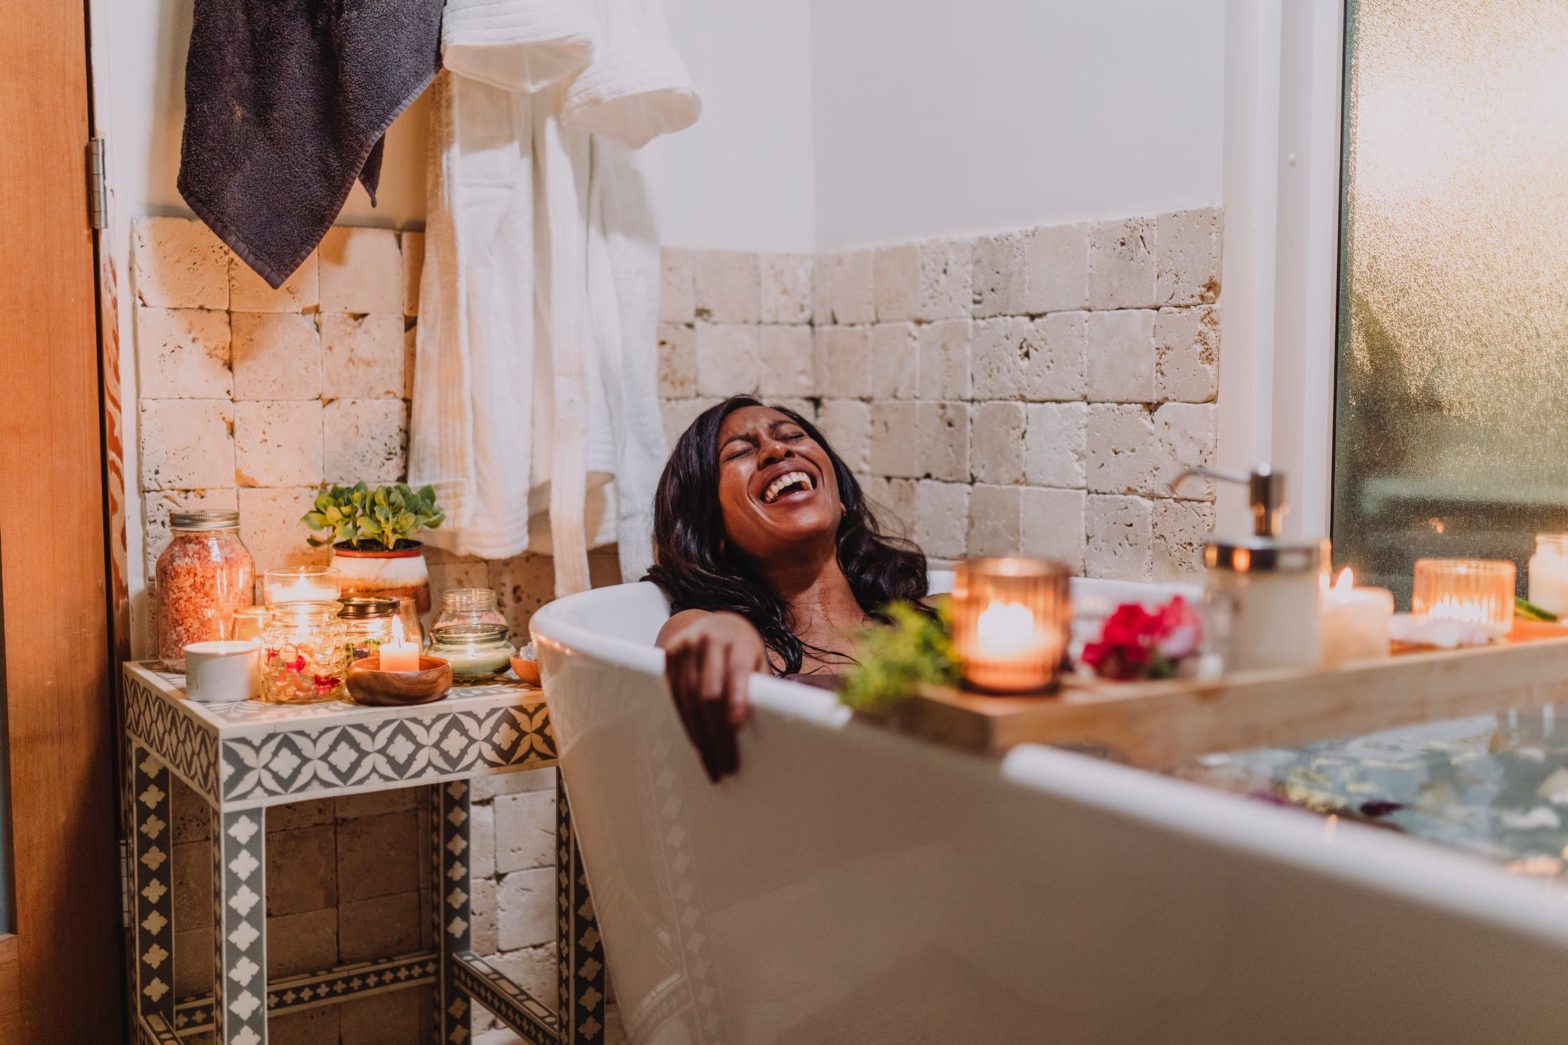 All You Need To Create Your Own At-Home, Black Owned Spa Day